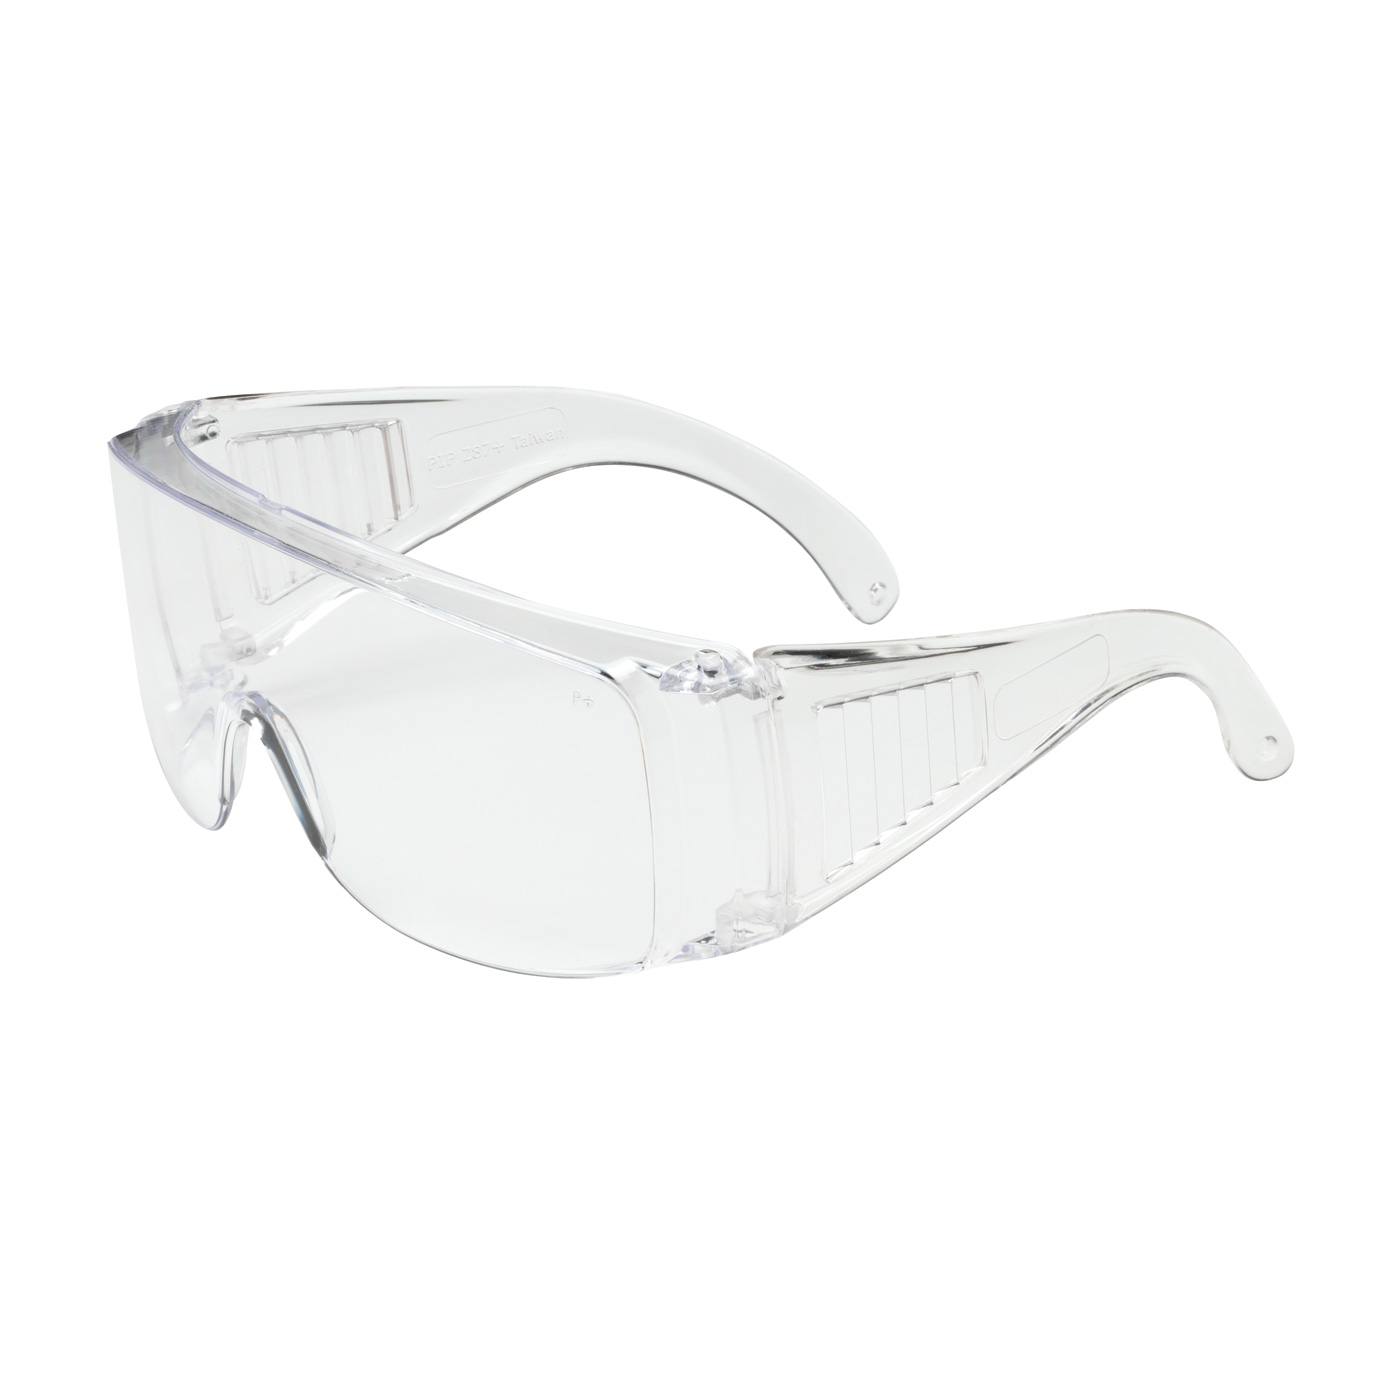 #250-99-0900 PIP Scout™ OTG Rimless Safety Glasses with Clear Temple, Clear Lens and Anti-Scratch Coating 